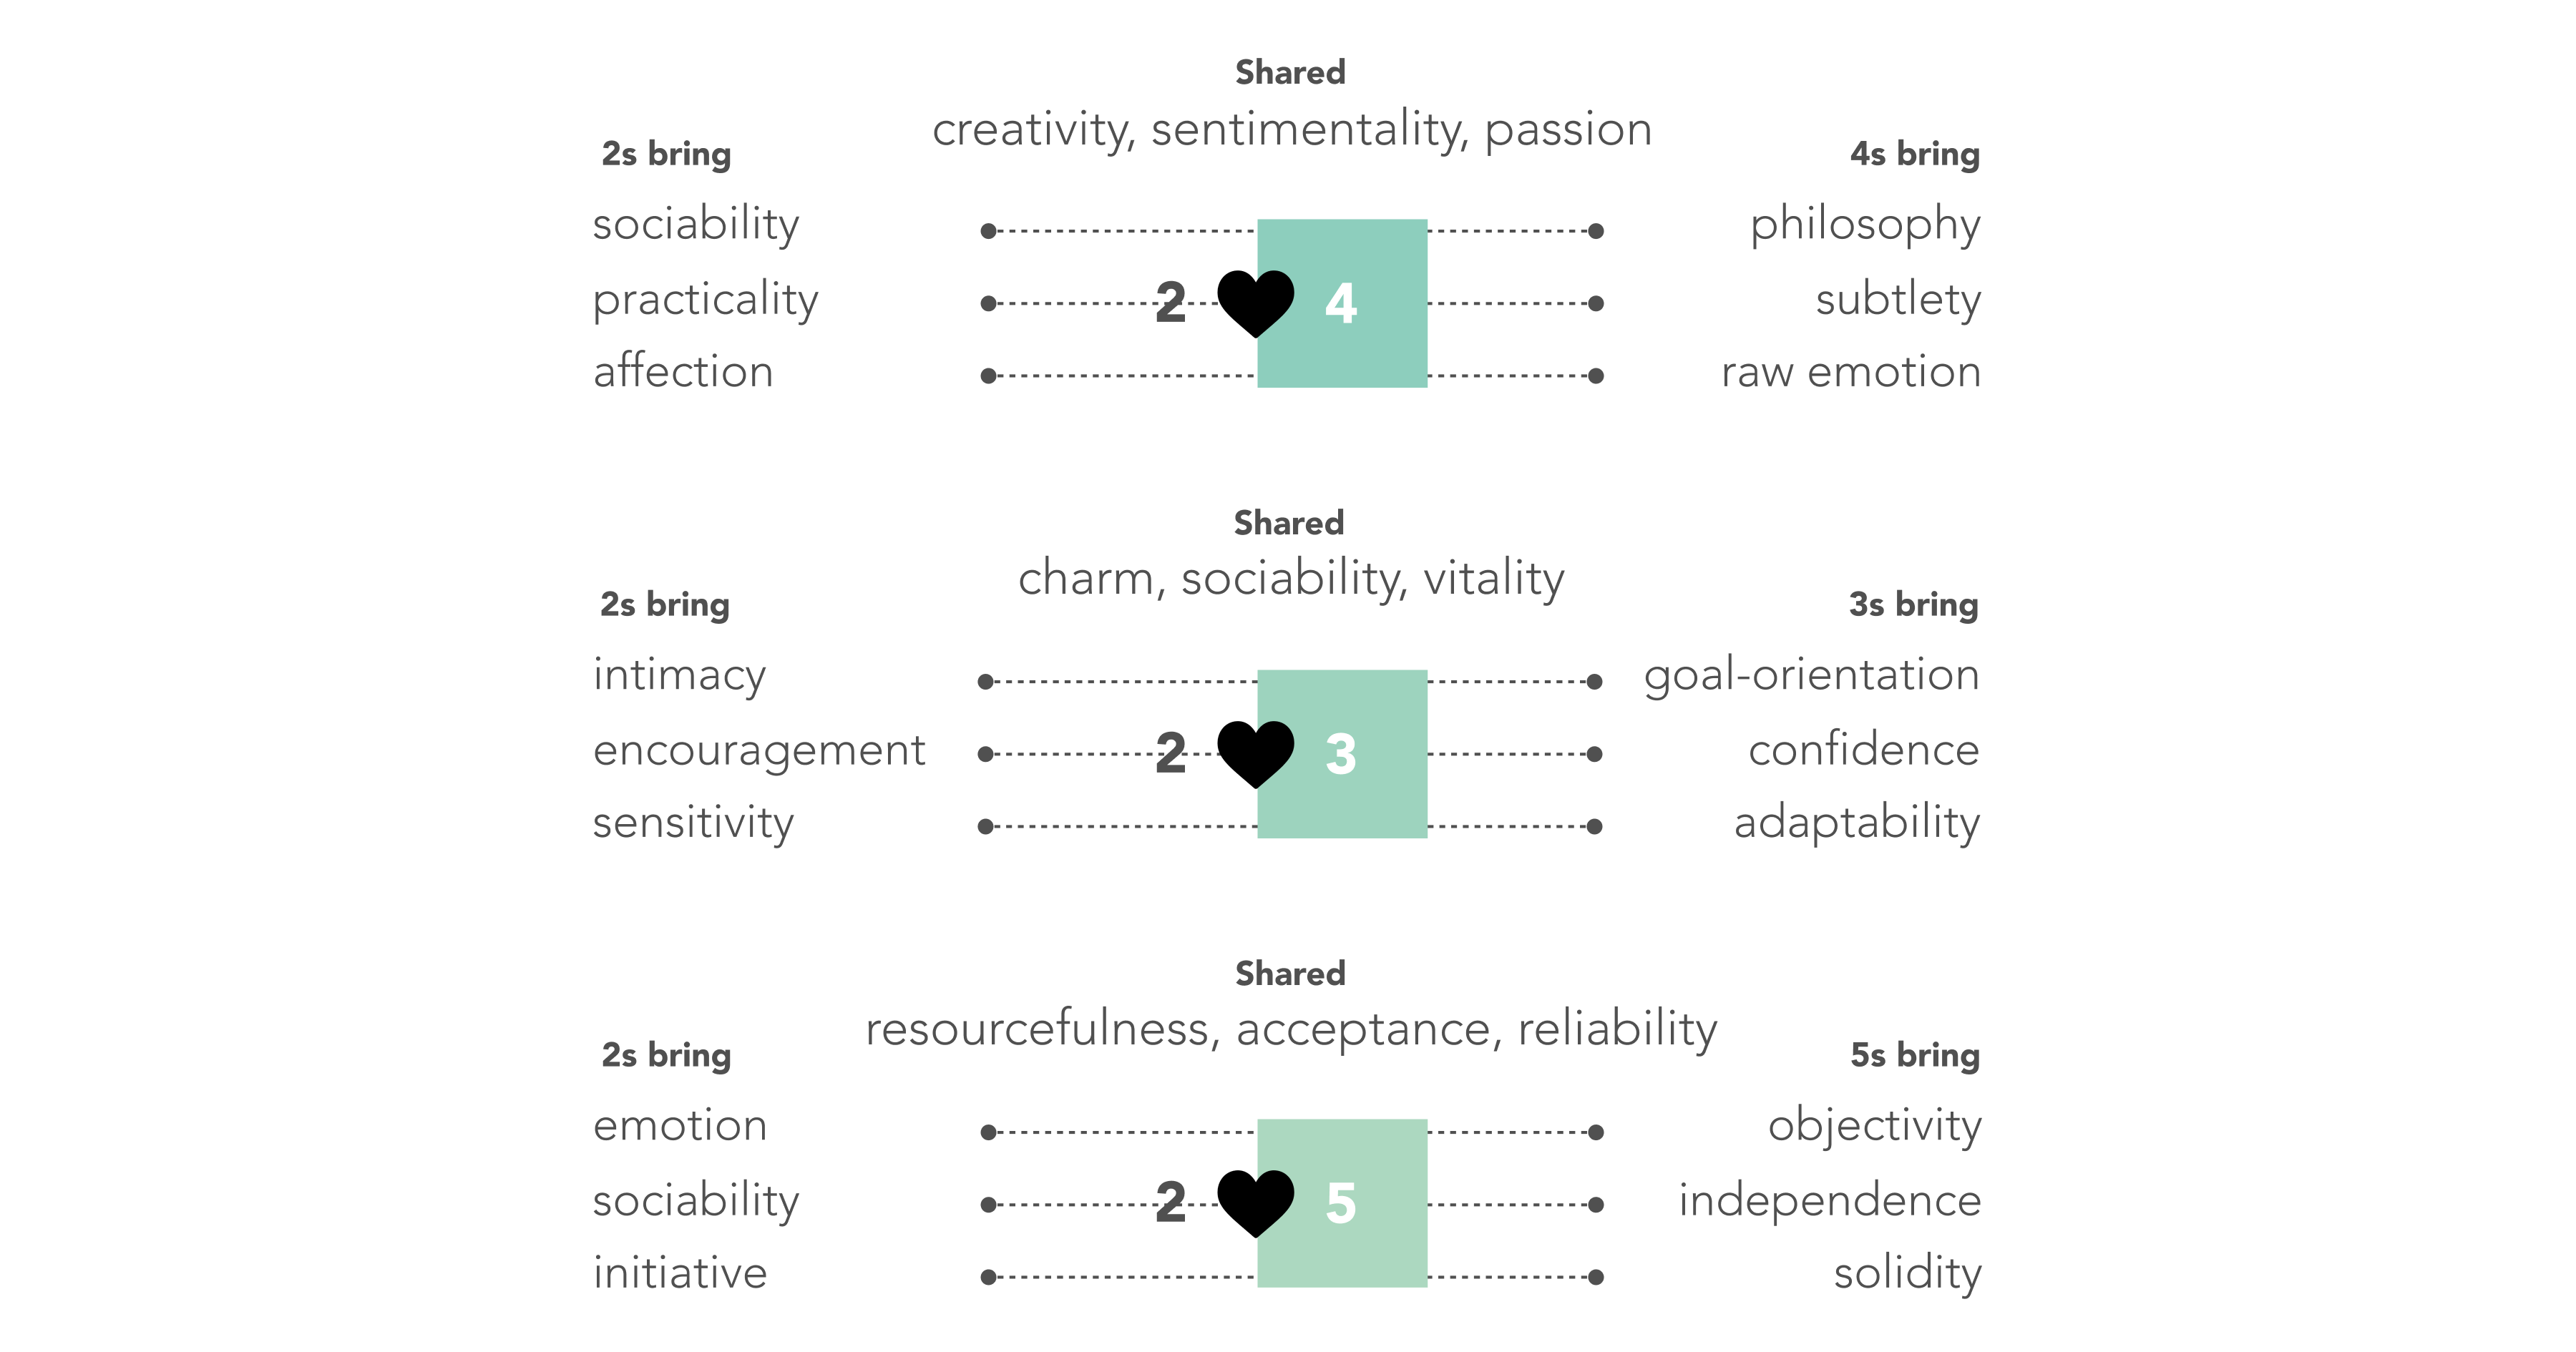 2s and 4s share creativity, sentimentality, passion. 2s bring sociability, practicality, affection, while 4s bring philosophy, subtlety, raw emotion. 2s and 3s share charm, sociability, vitality. 2s bring intimacy, encouragement, sensitivity, while 3s bring goal-orientation, confidence, adaptability. 2s and 5s share resourcefulness, acceptance, reliability. 2s bring emotion, sociability, initiative, while 5s bring objectivity, independence, solidity.